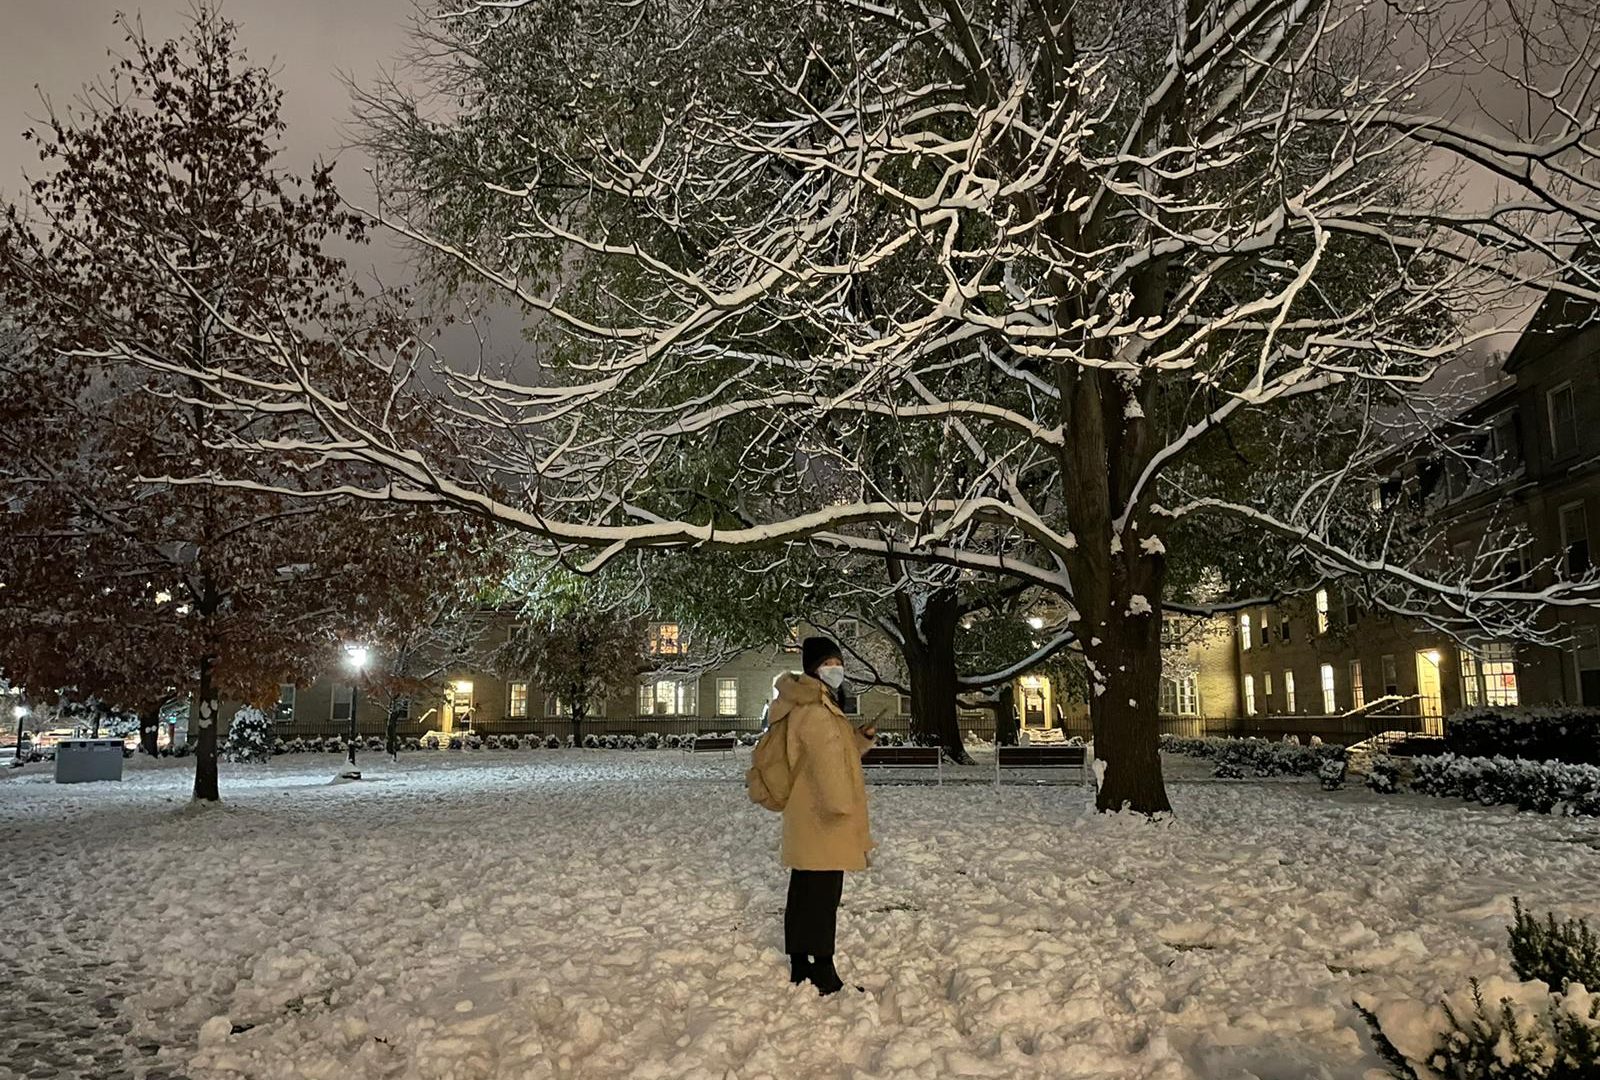 A student standing at an area filled with snow